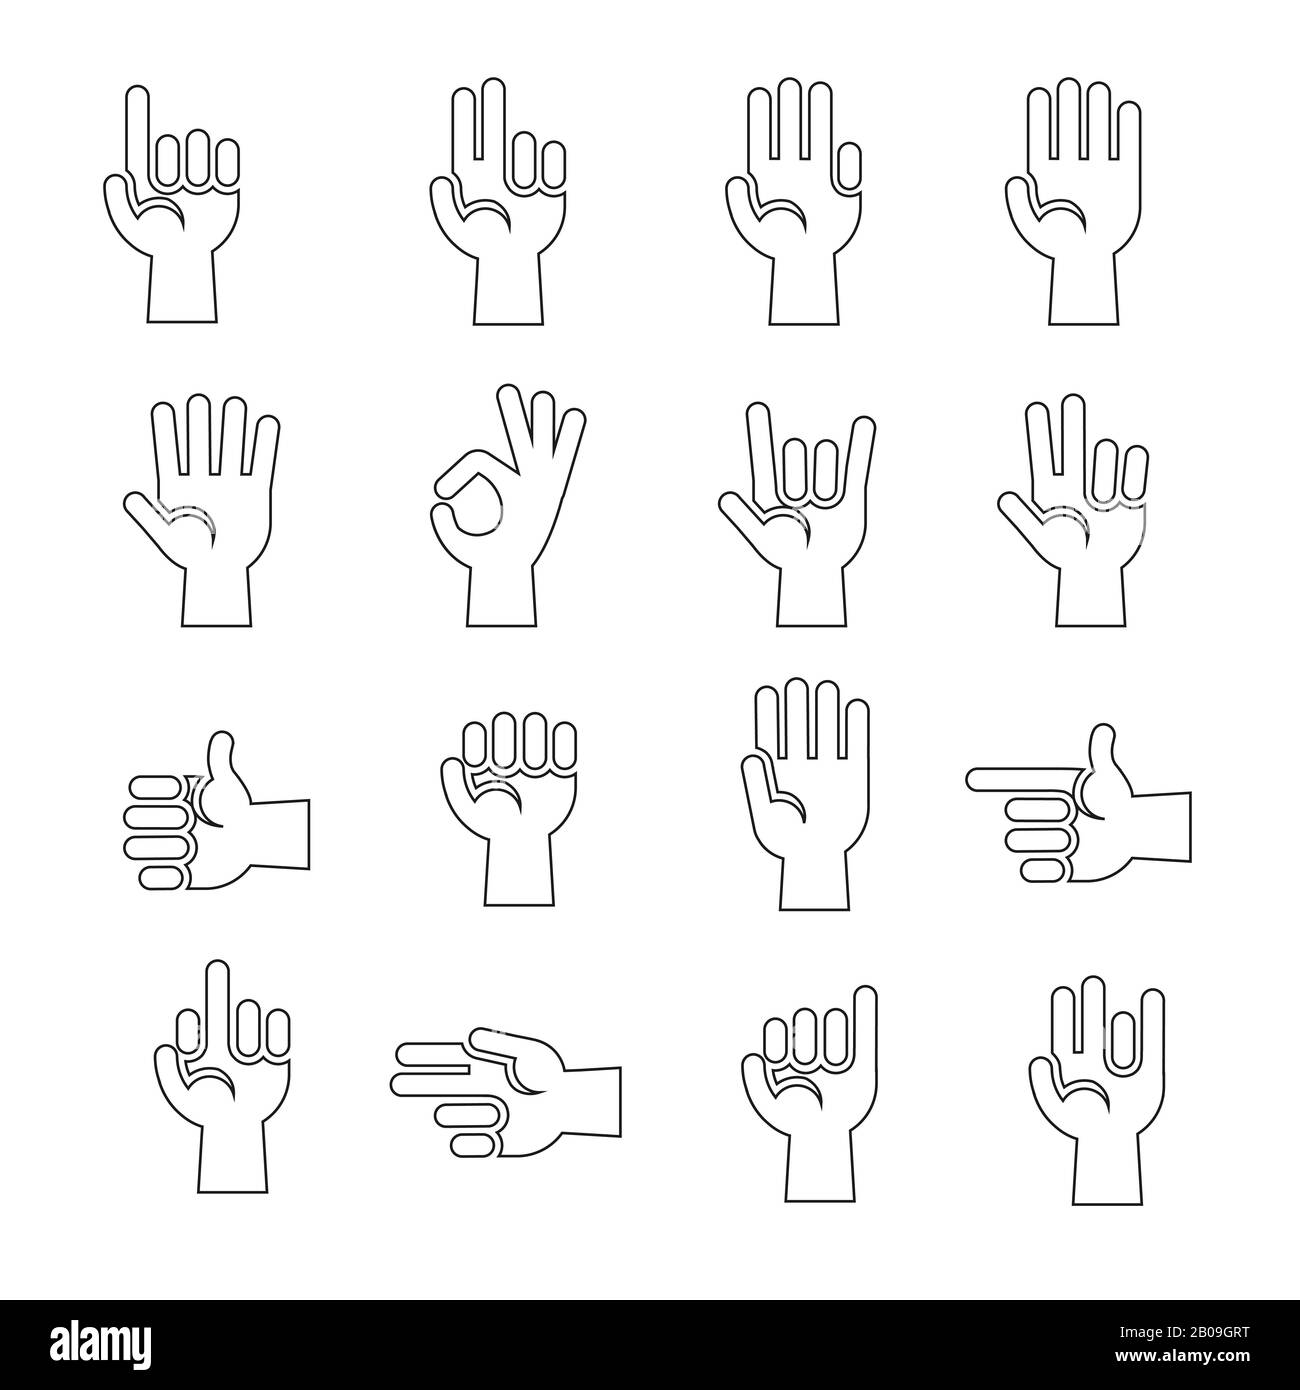 Line art hands gestures vector icons set in black and white illustration Stock Vector